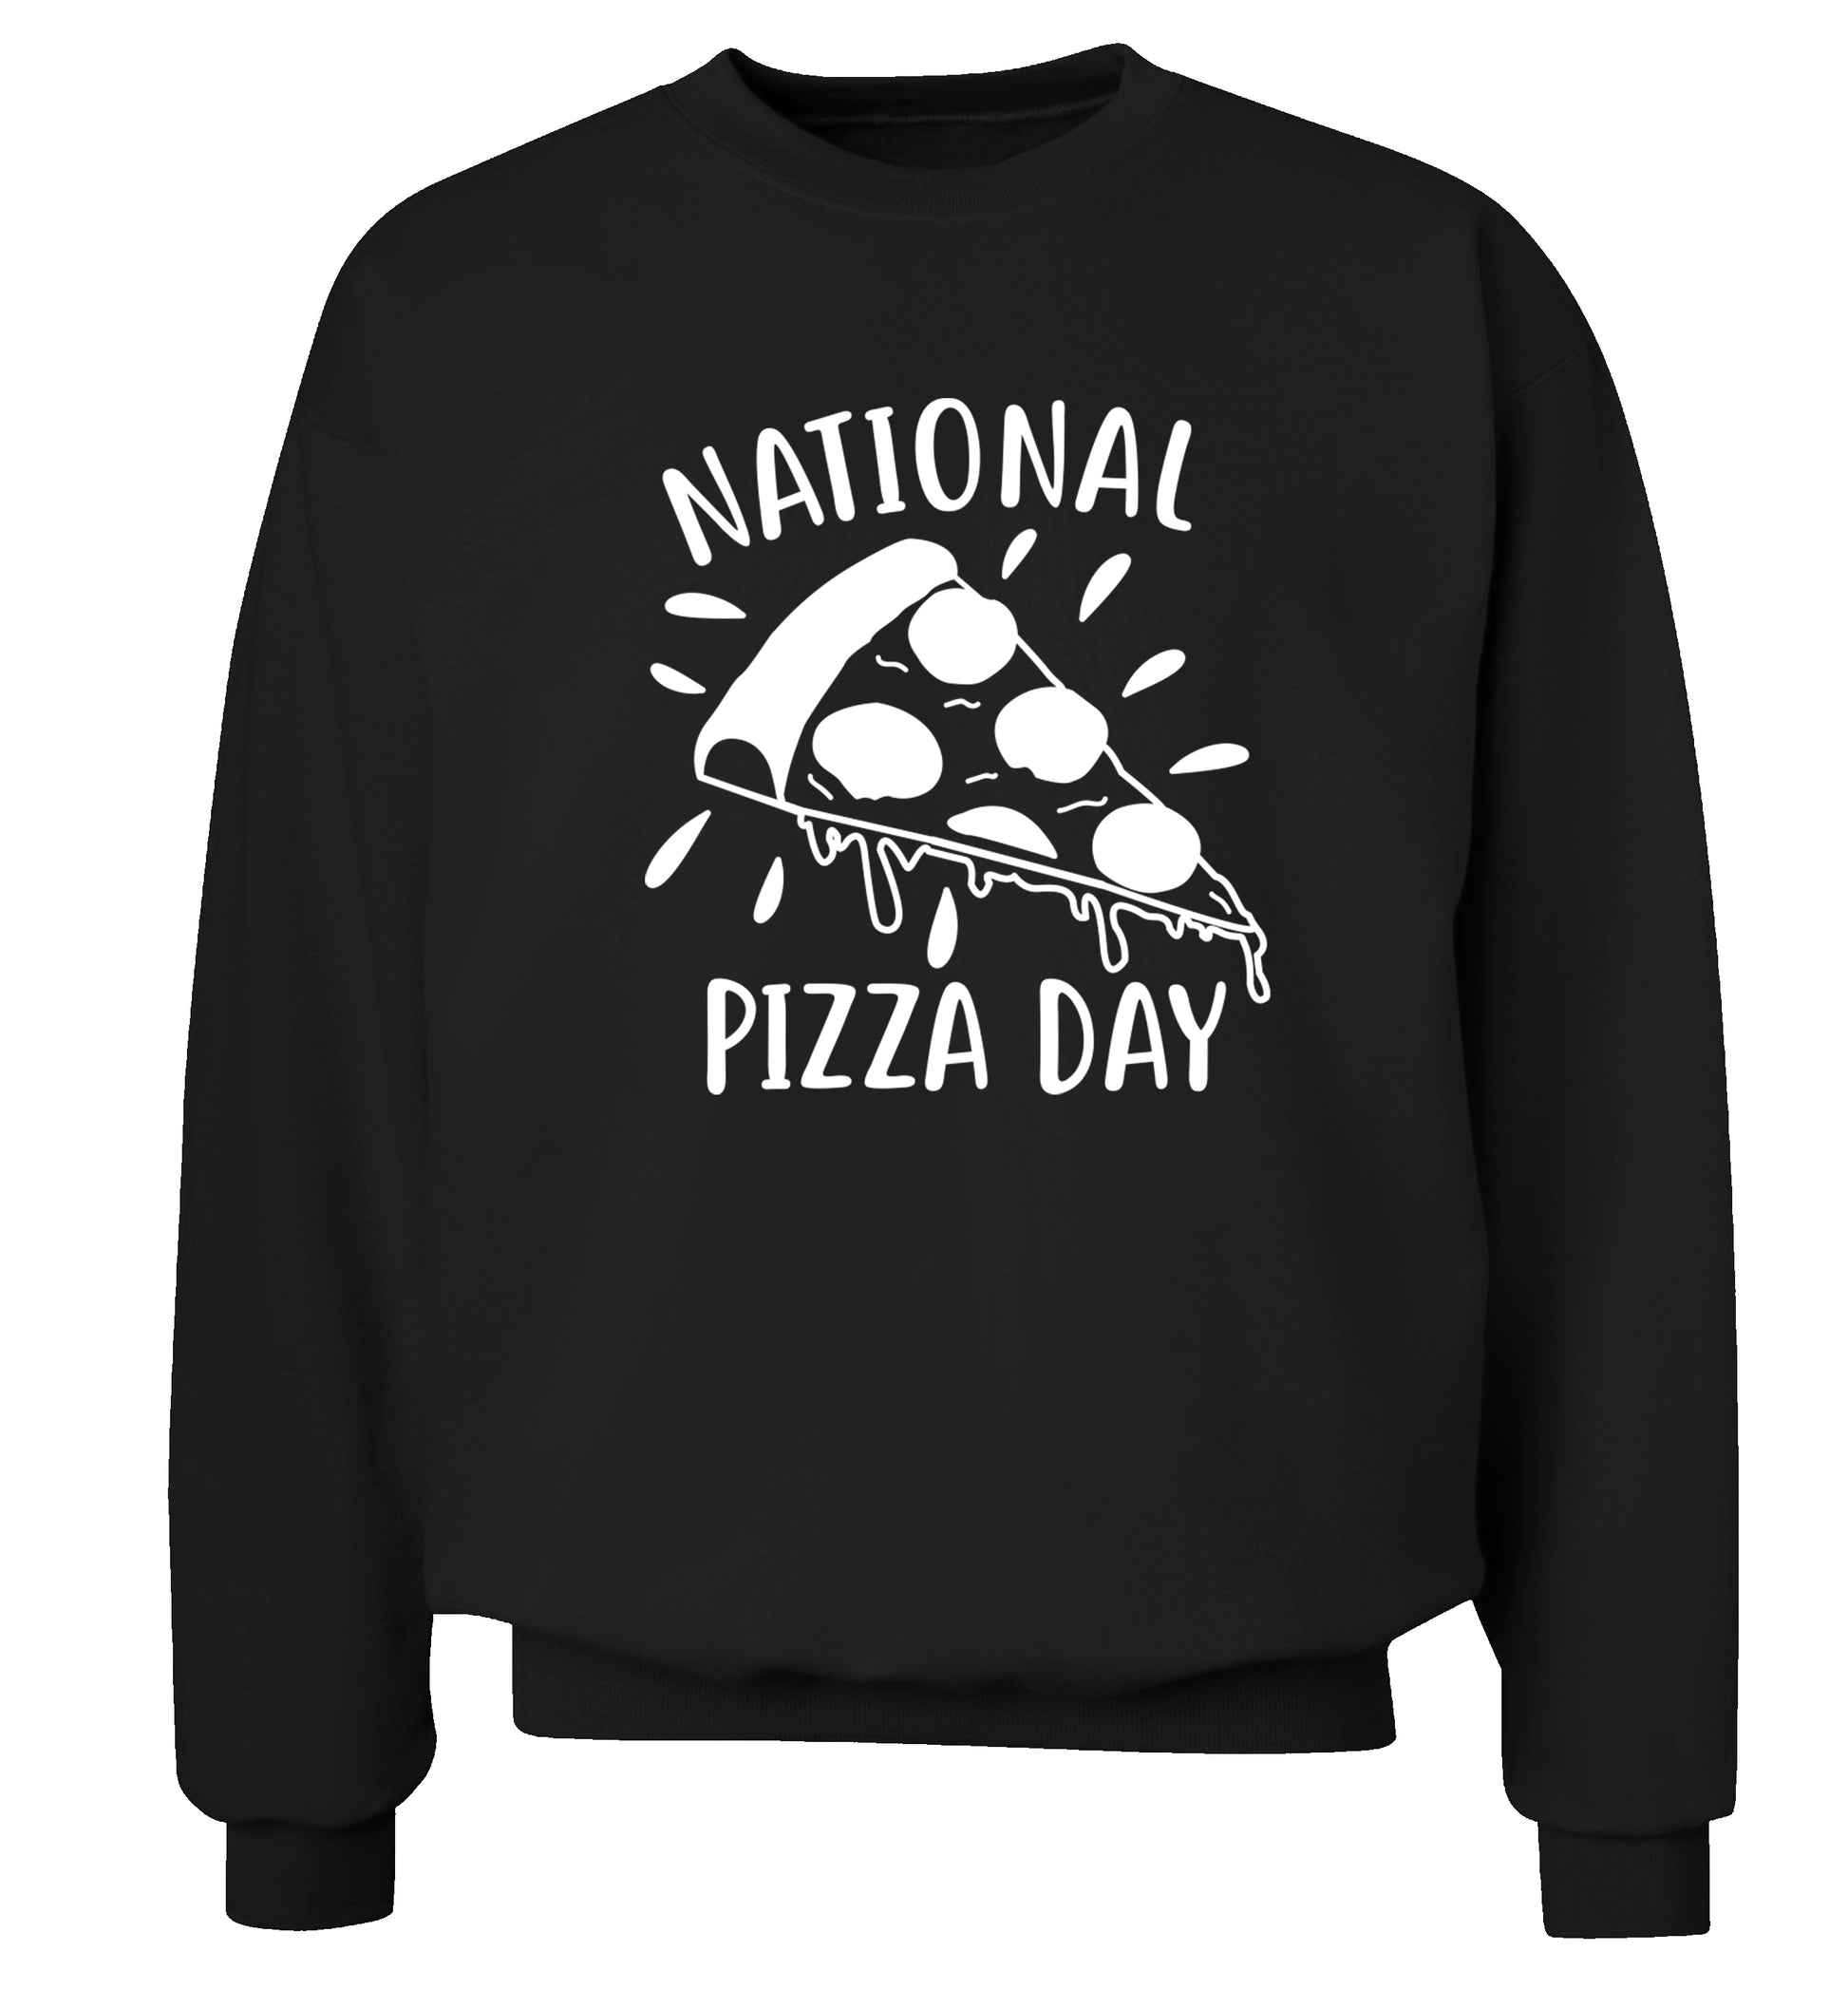 National pizza day Adult's unisex black Sweater 2XL